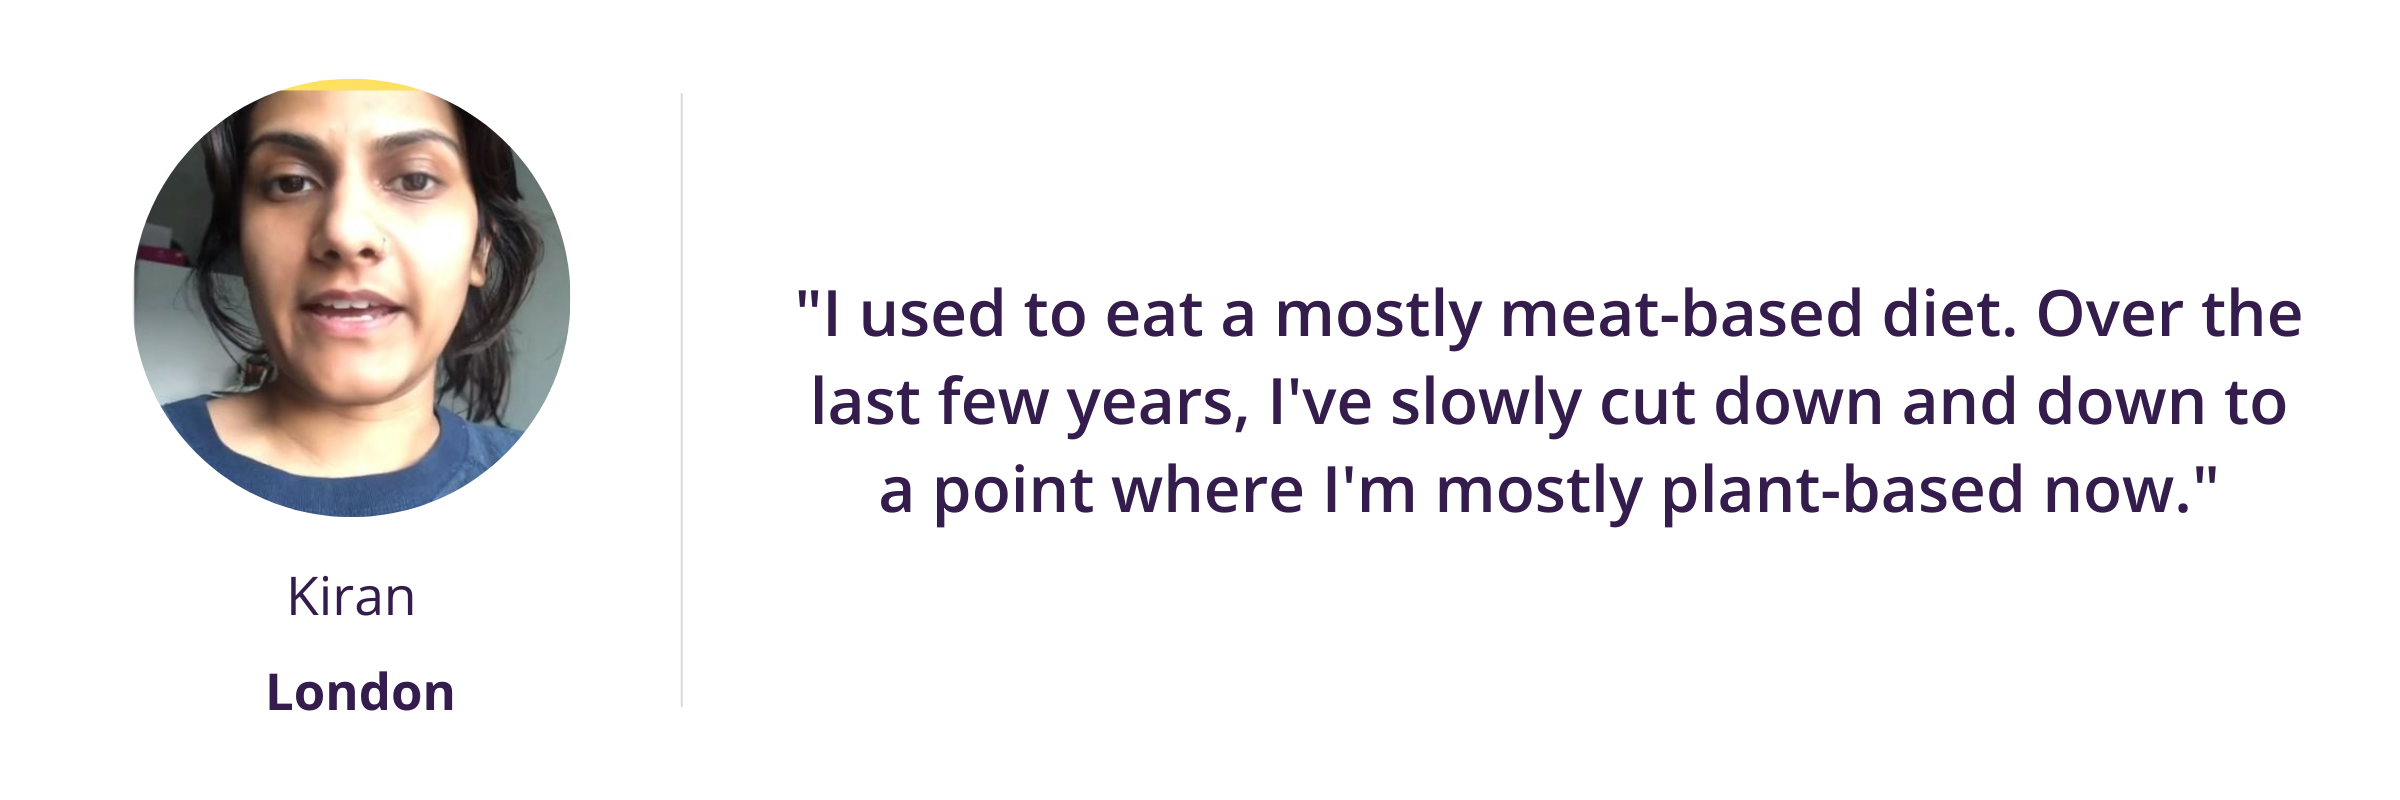 "I used to eat a mostly meat-based diet. Over the last few years, I've slowly cut down and down to a point where I'm mostly plant-based now."